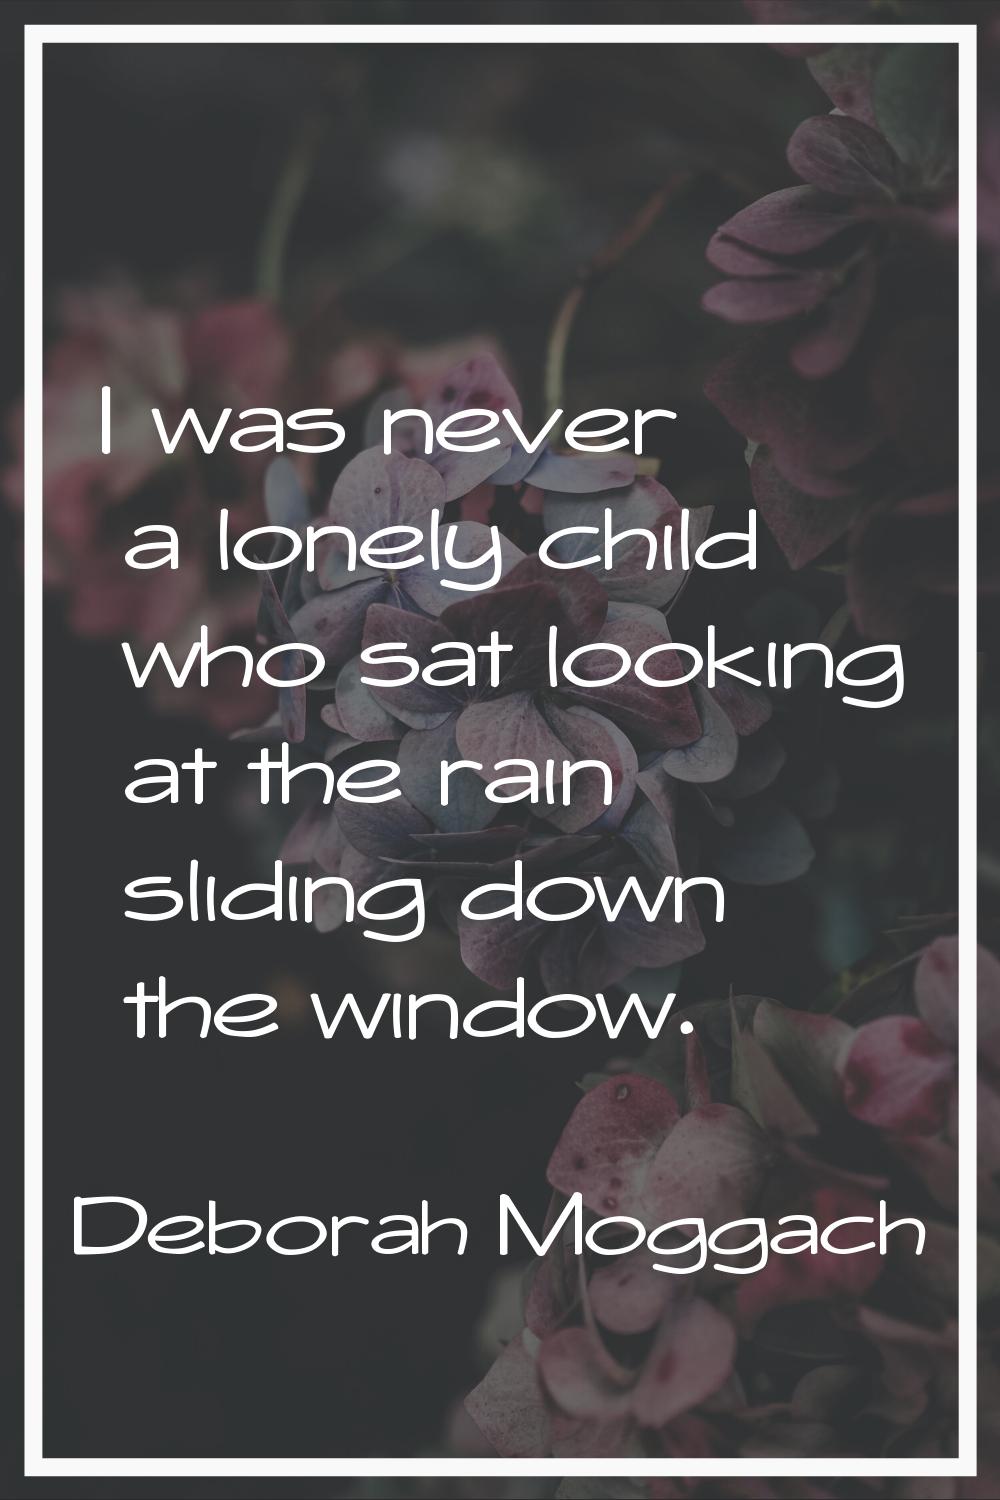 I was never a lonely child who sat looking at the rain sliding down the window.